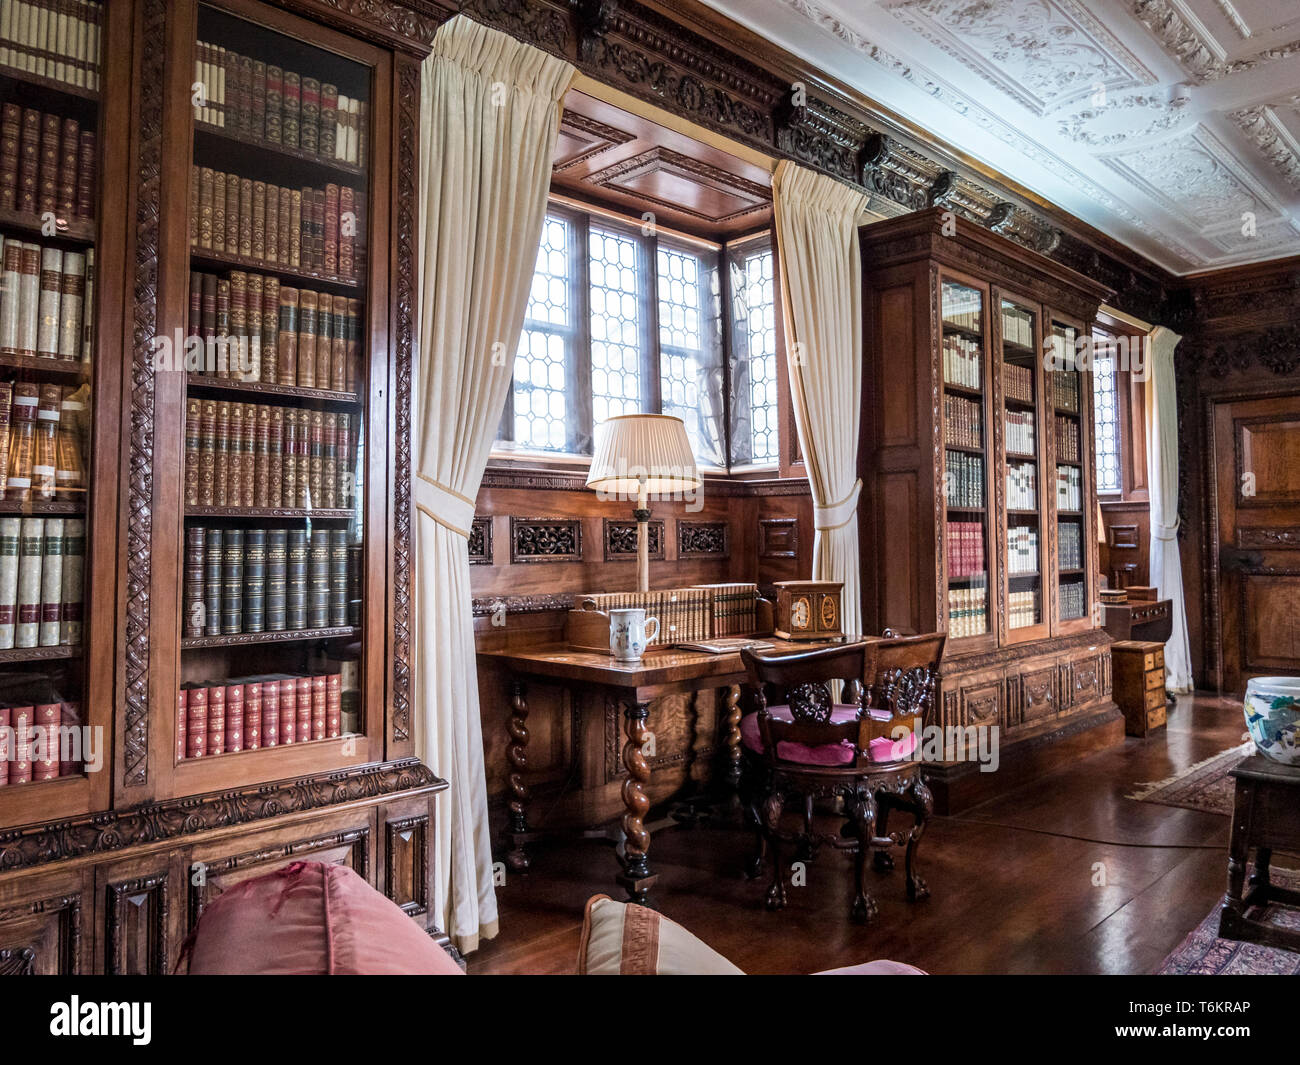 The interior and Library seen here, at Hever Castle in Kent near ...